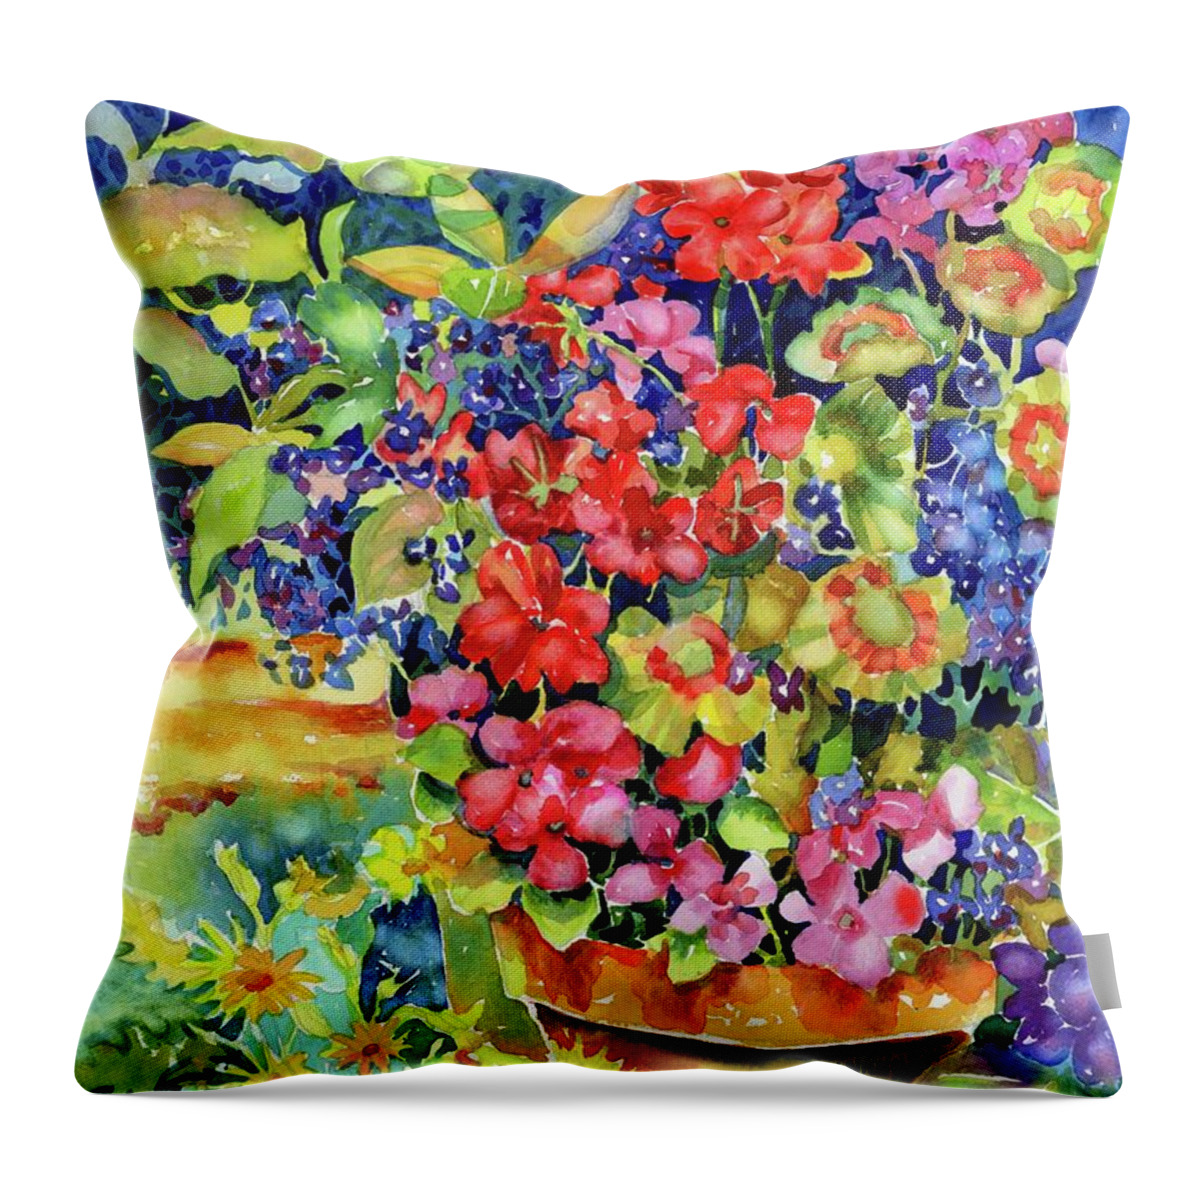 Watercolor Throw Pillow featuring the painting Geranium I by Ann Nicholson